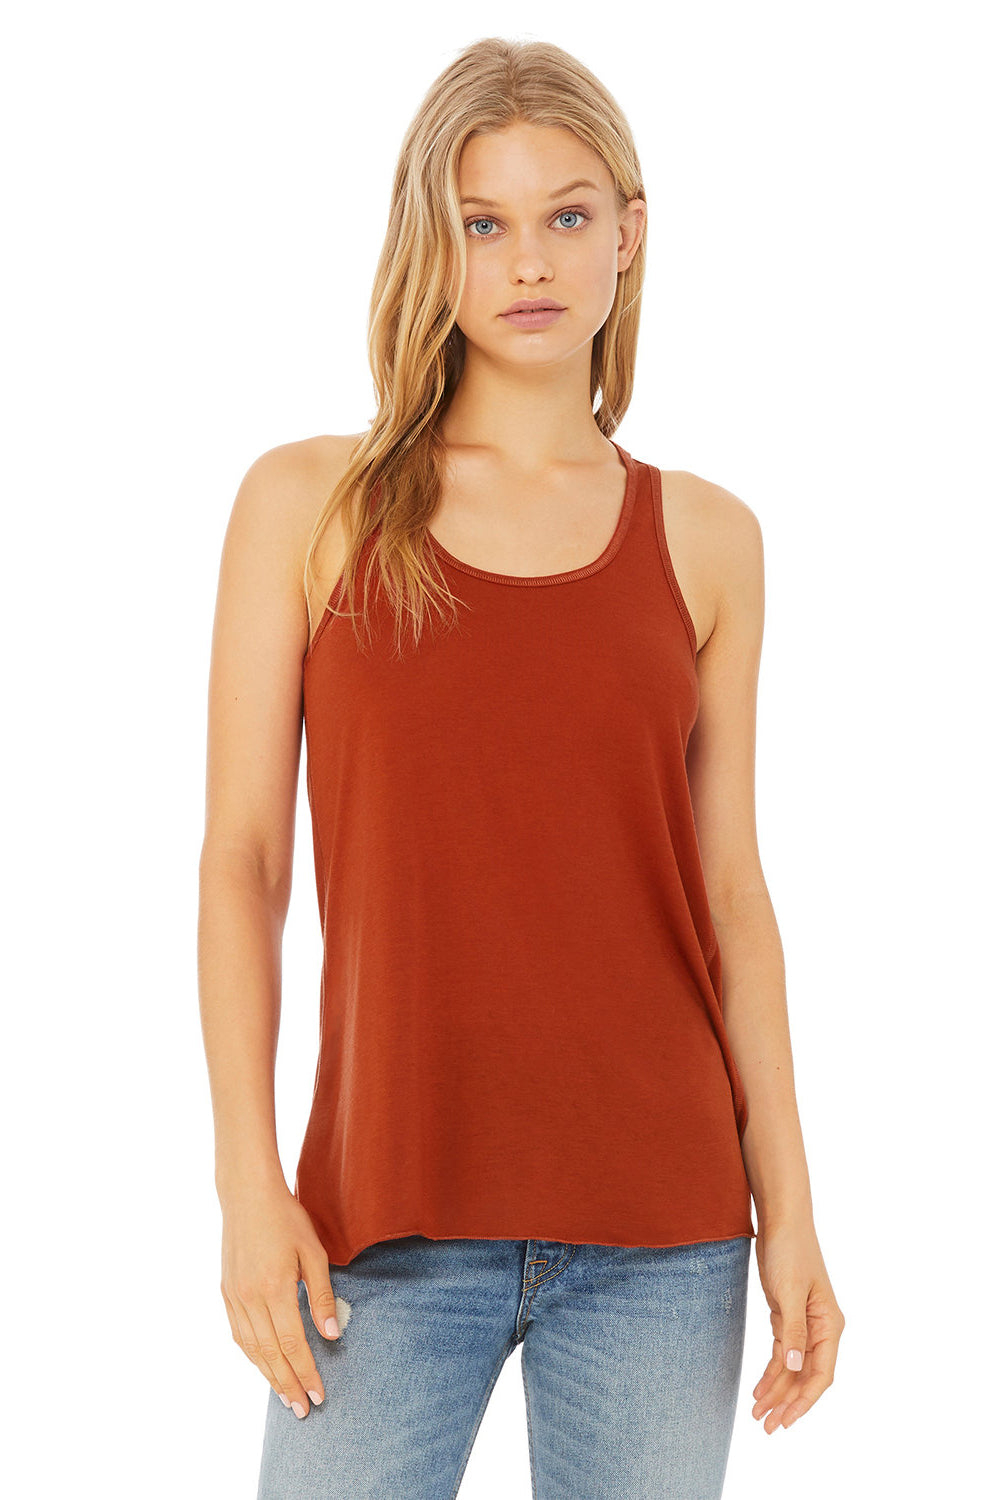 Bella + Canvas BC8800/B8800/8800 Womens Flowy Tank Top Brick Red Front